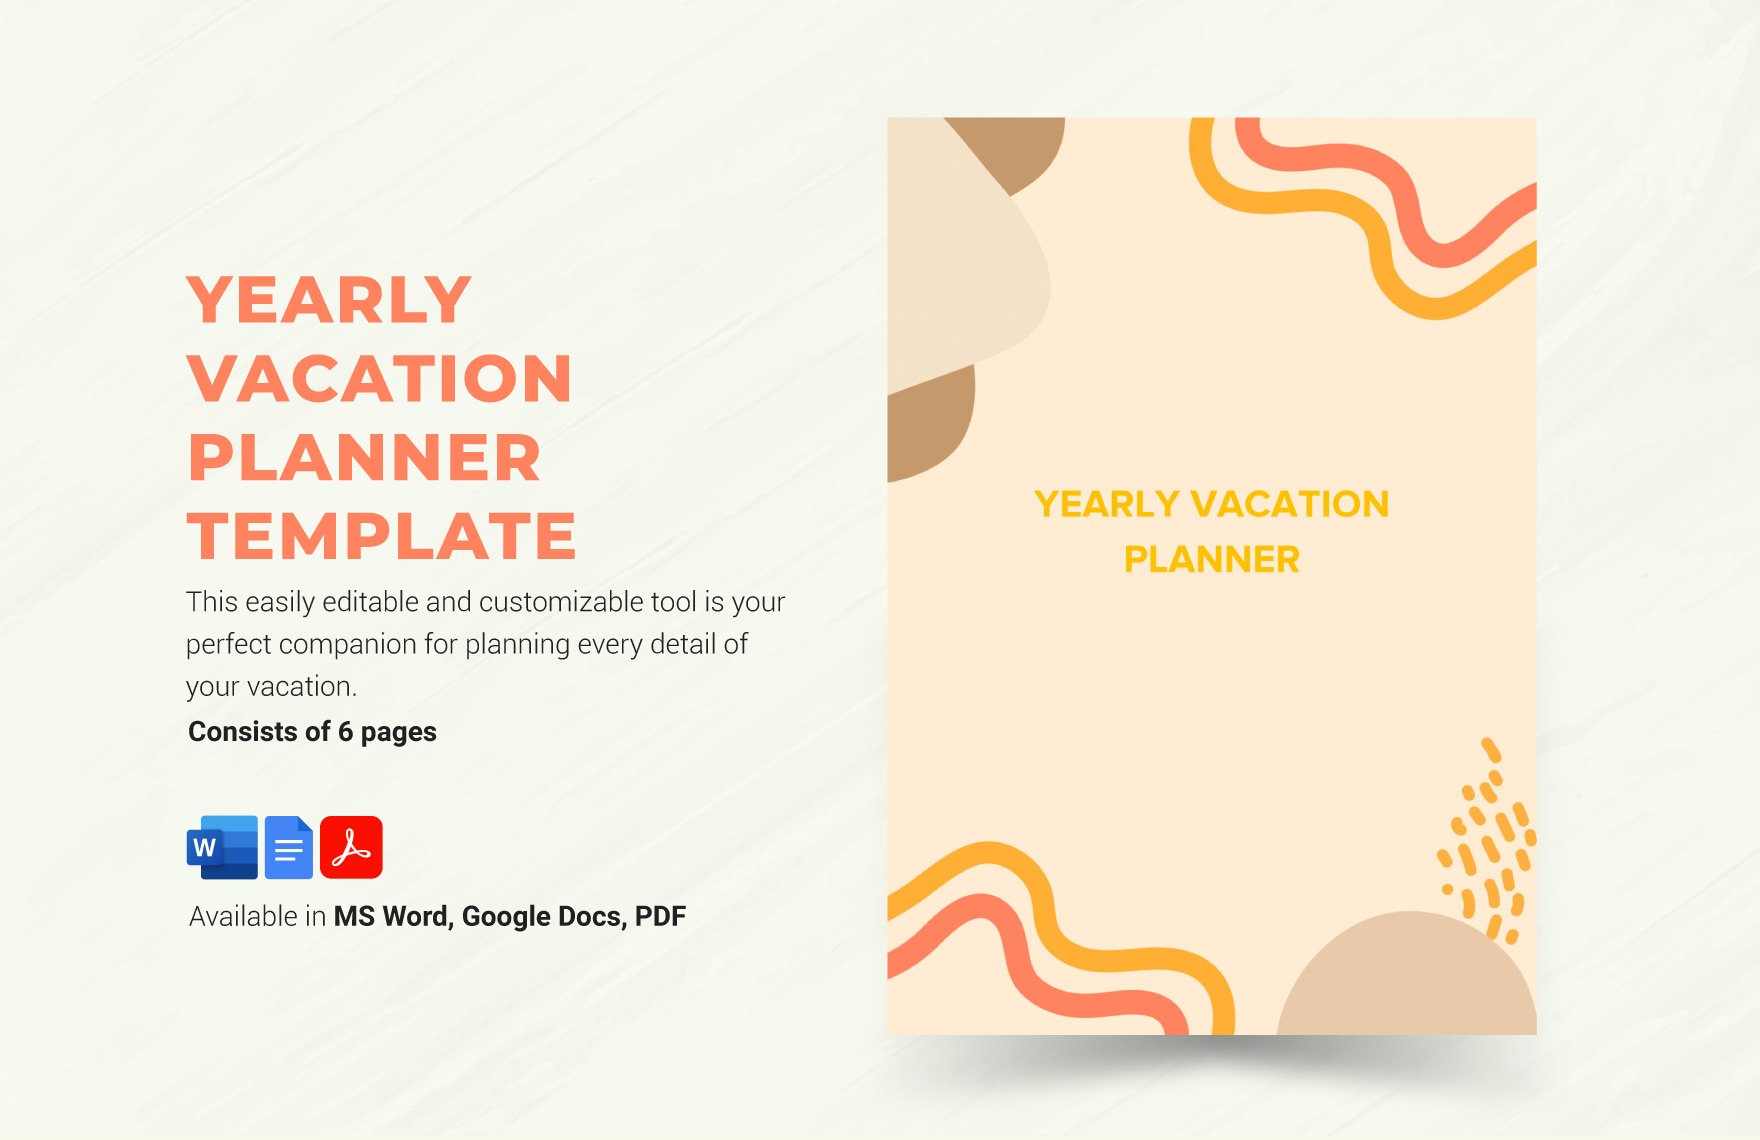 Yearly Vacation Planner Template